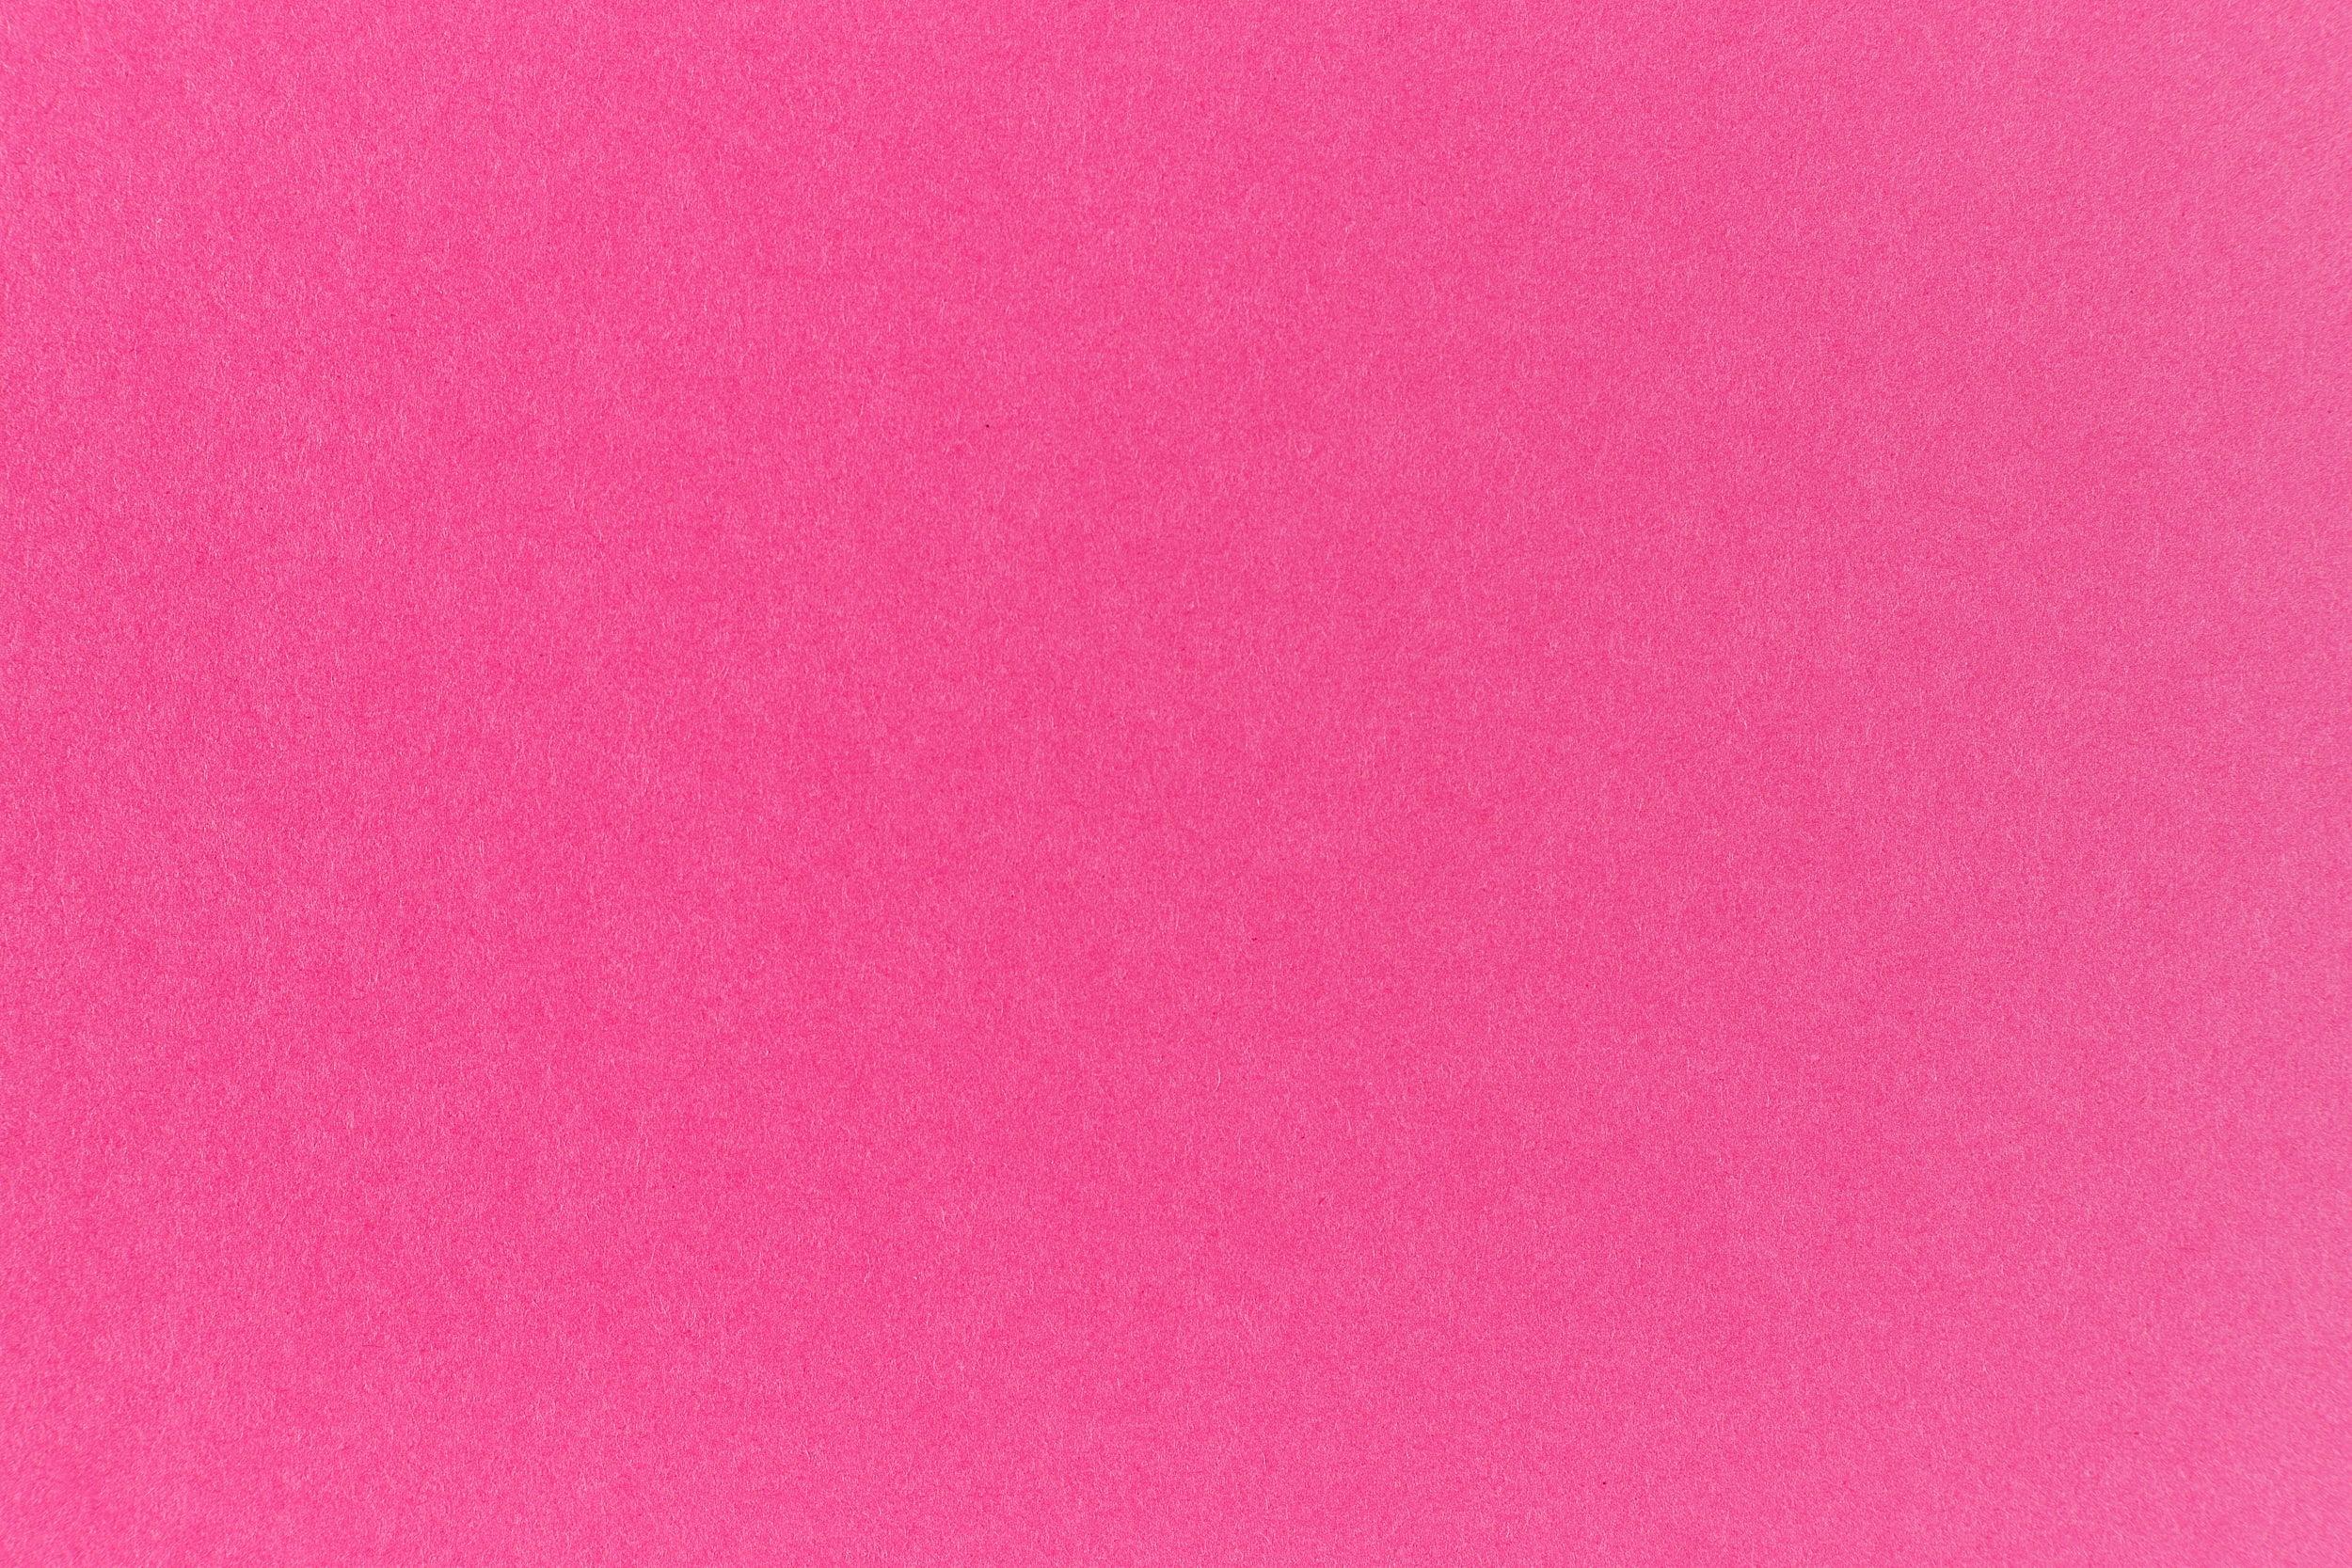 Blu Raspberry Cardstock - Cover Weight Paper - Pop-Tone – French Paper